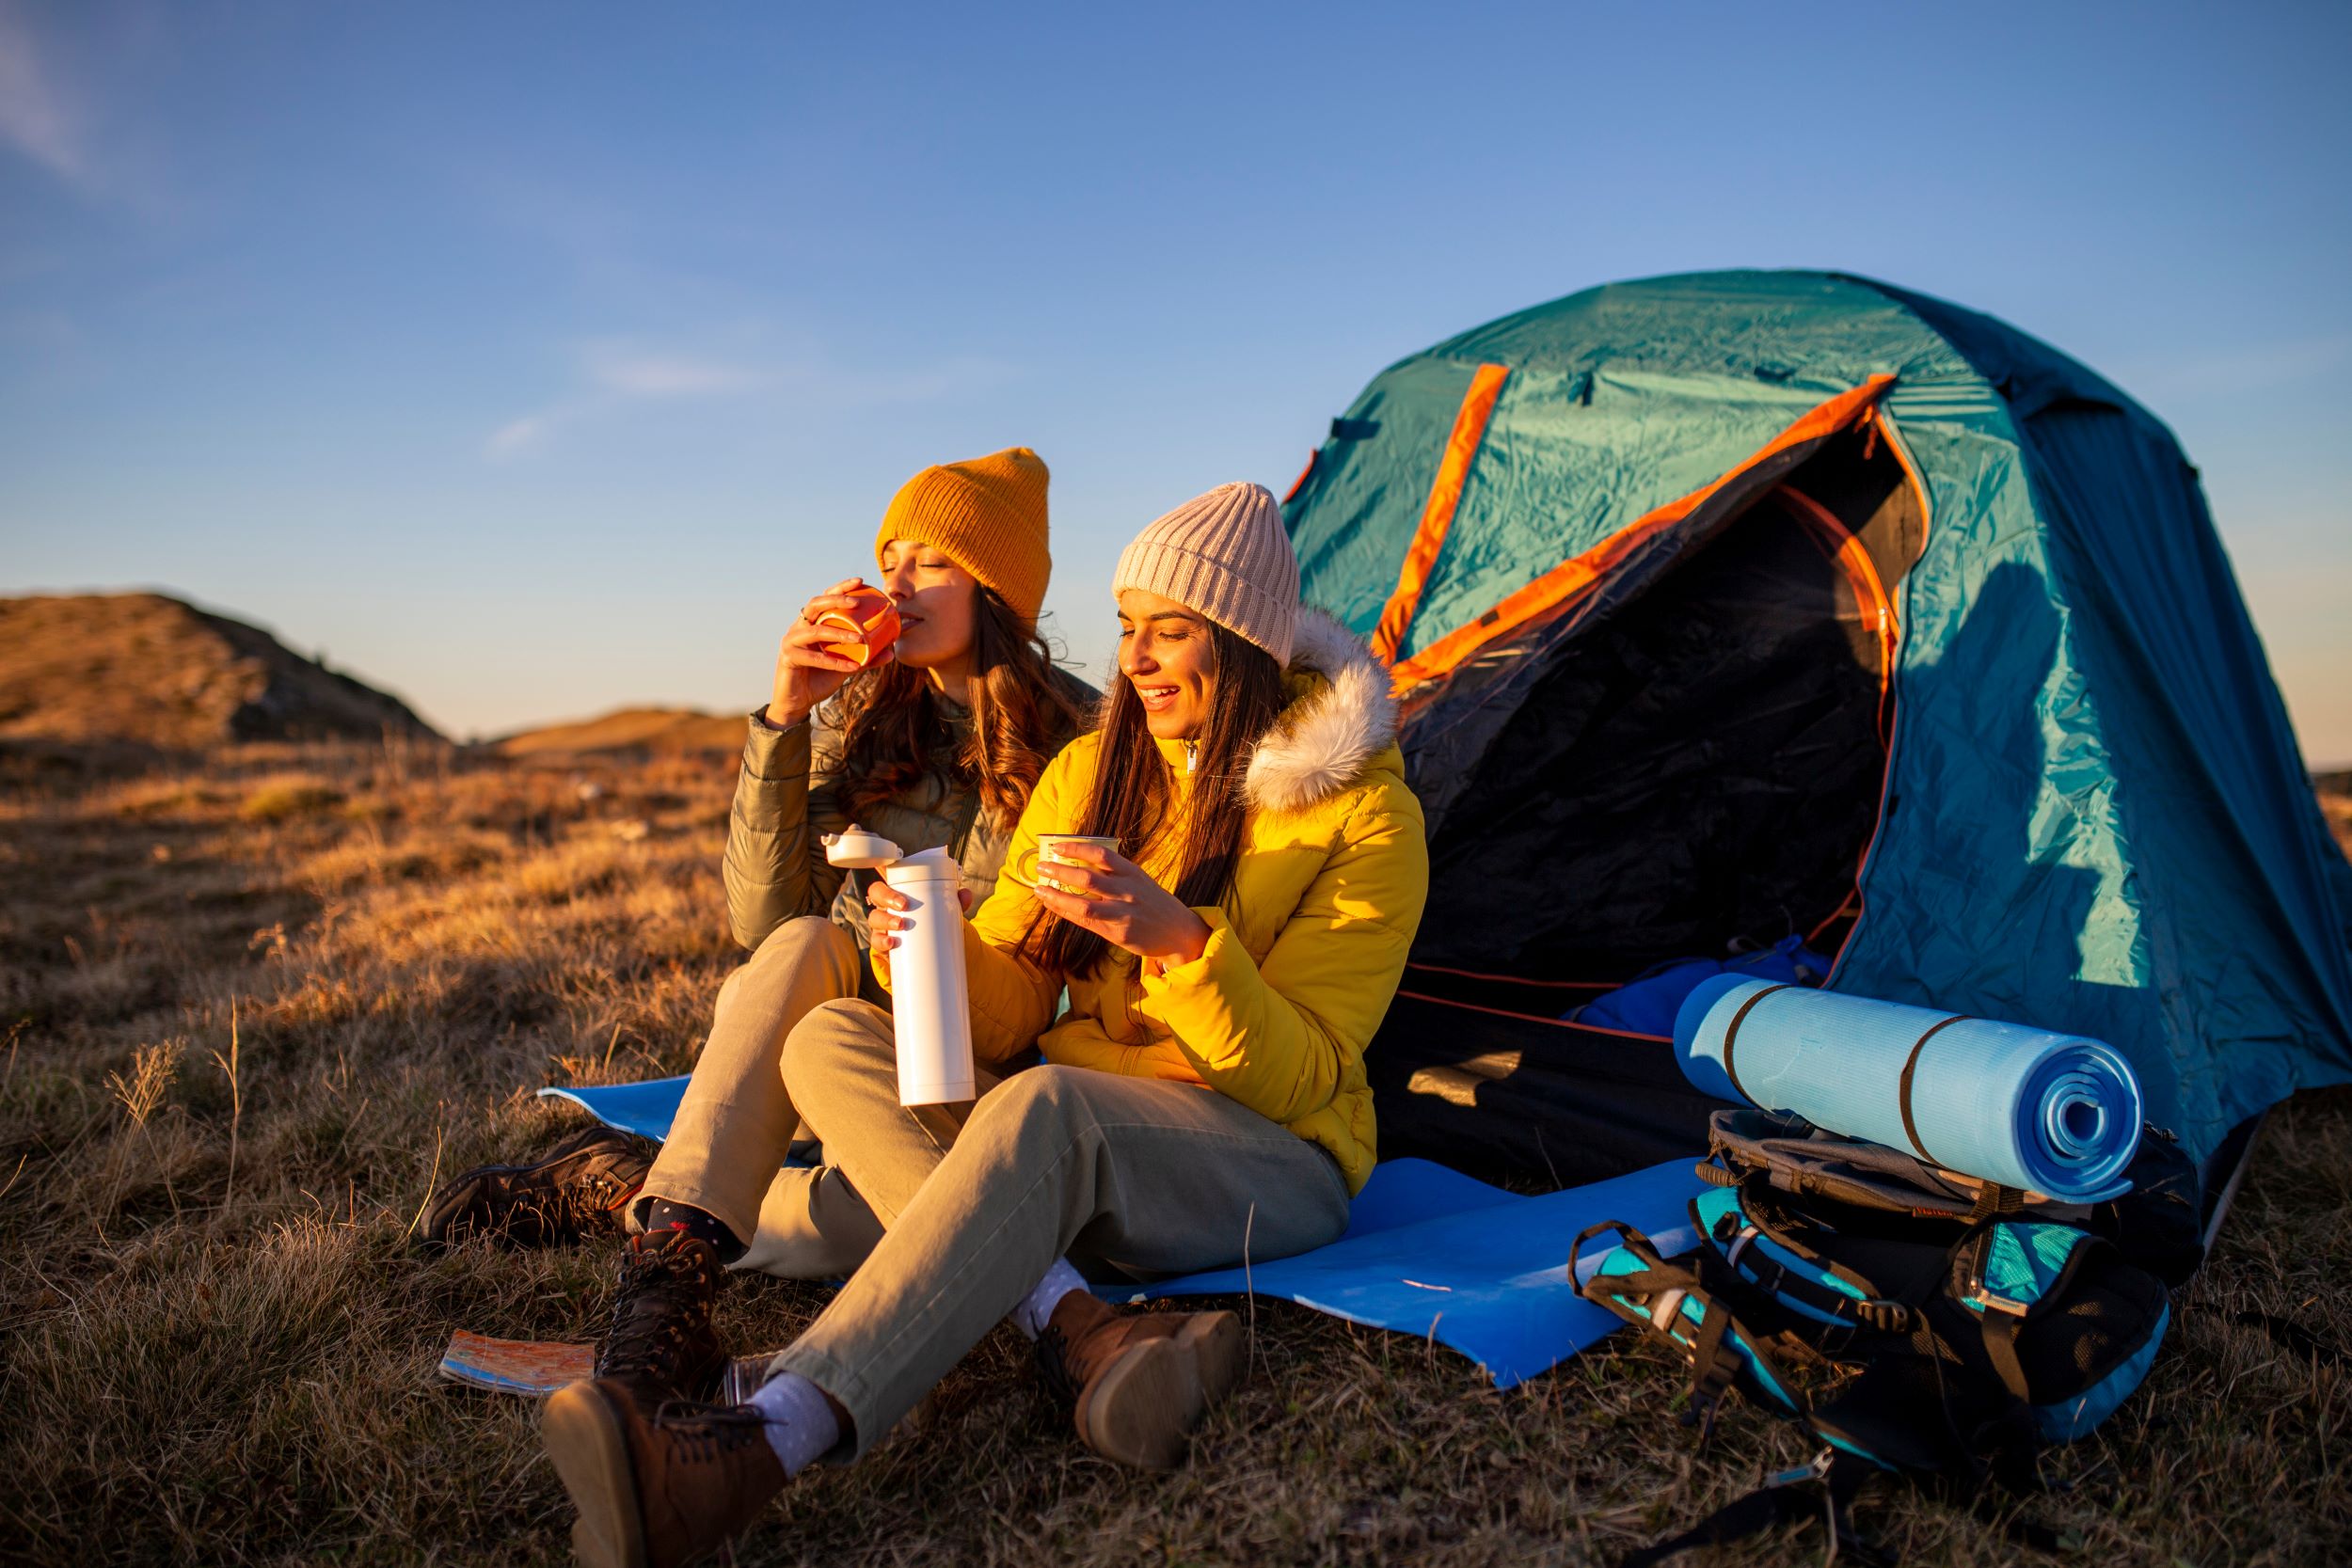 Two women drinking coffee at sunrise in front of their tent.